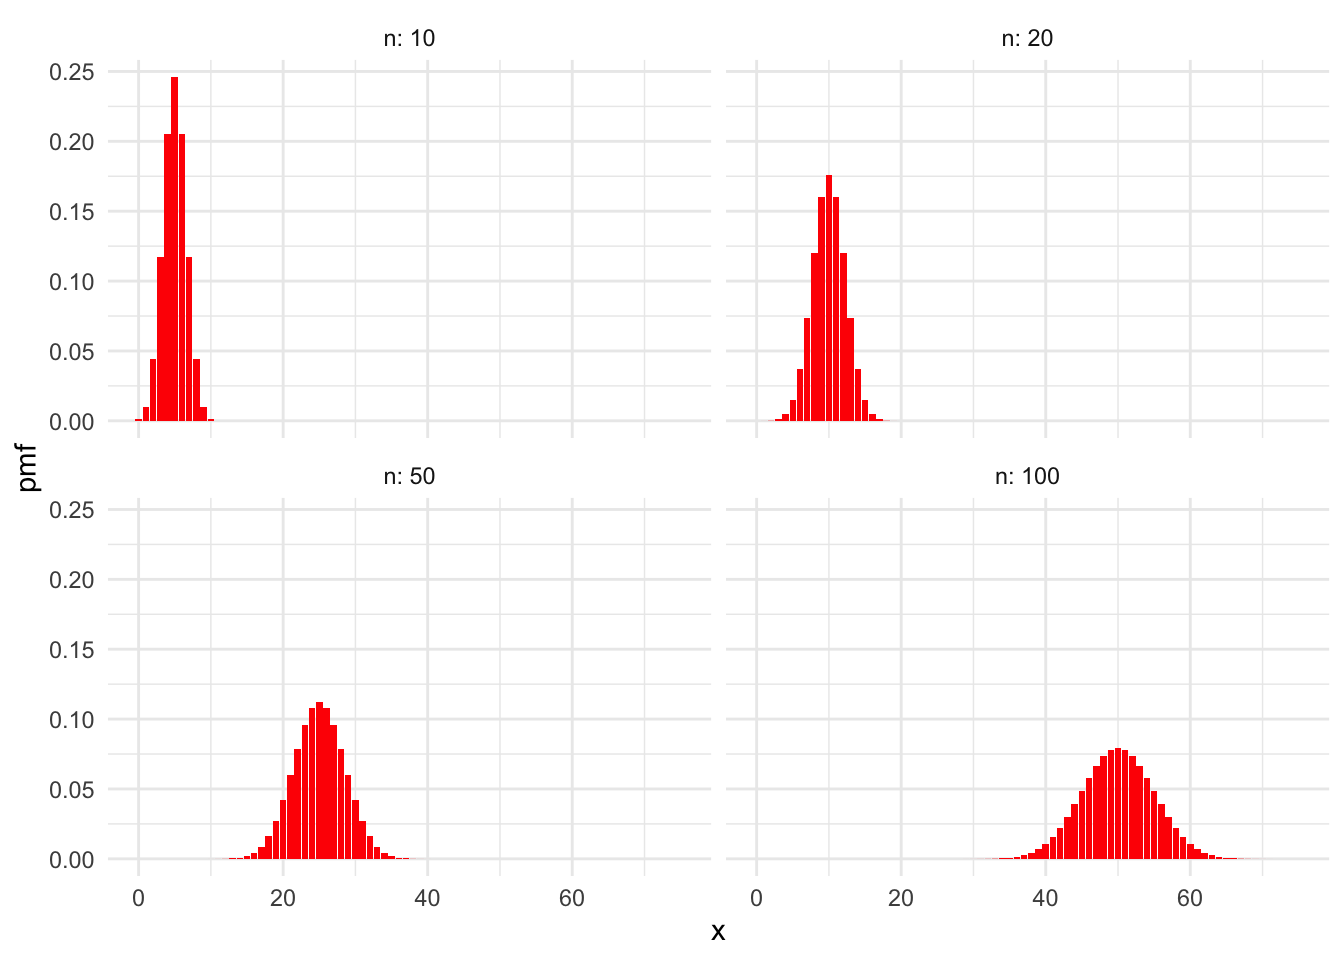 Binomial distributions with $p = 0.5$ and various values of $n$.